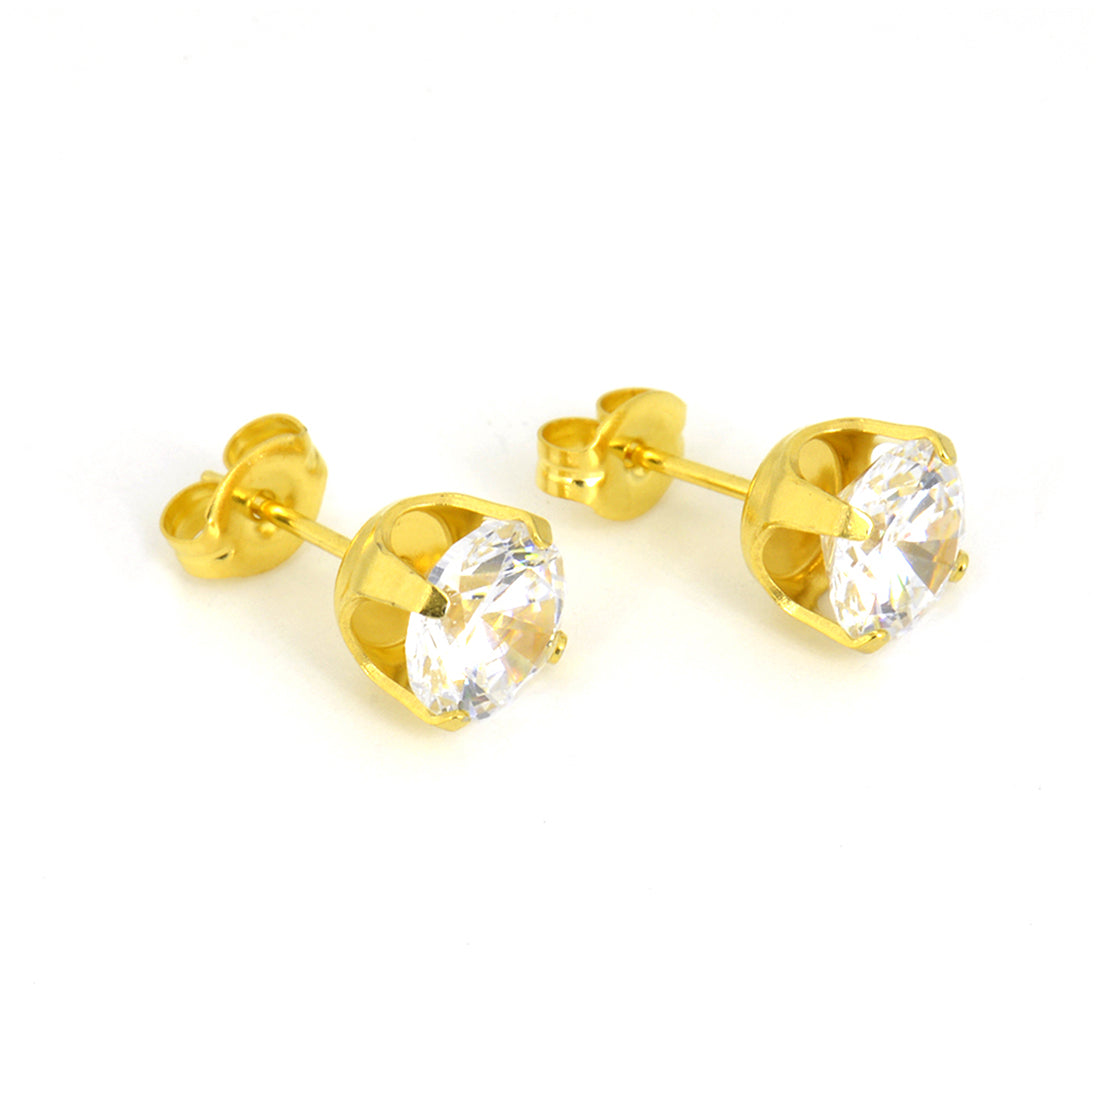 7MM Cubic Zirconia 24K Pure Gold Plated Ear Studs | Ideal for everyday wear